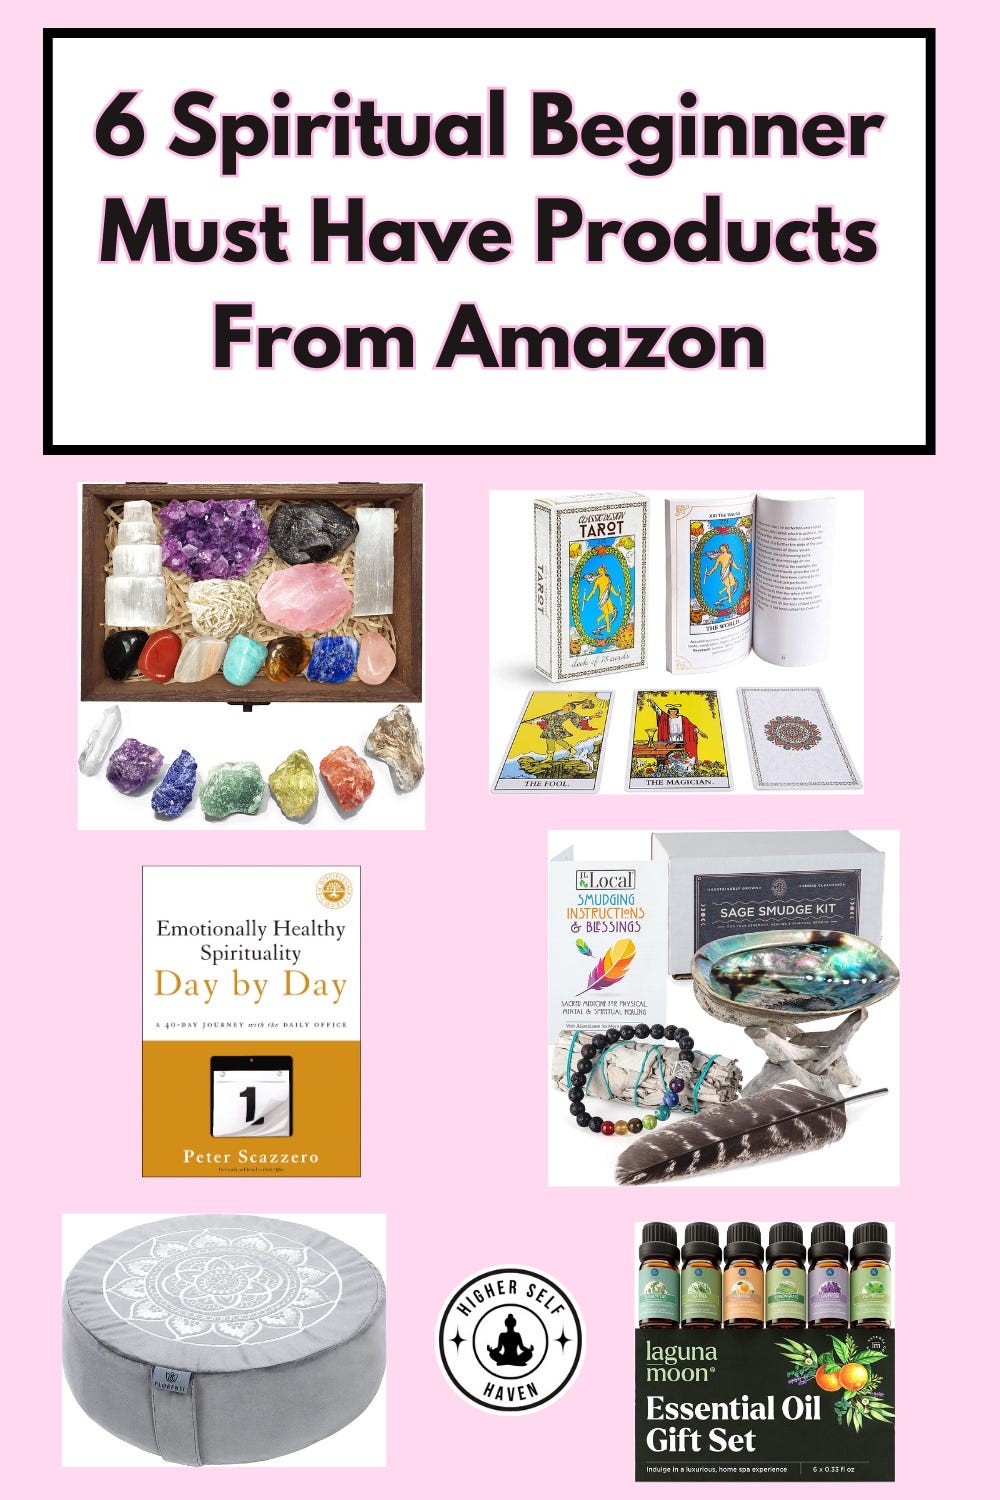 6 Spiritual Beginner Must Have Products From